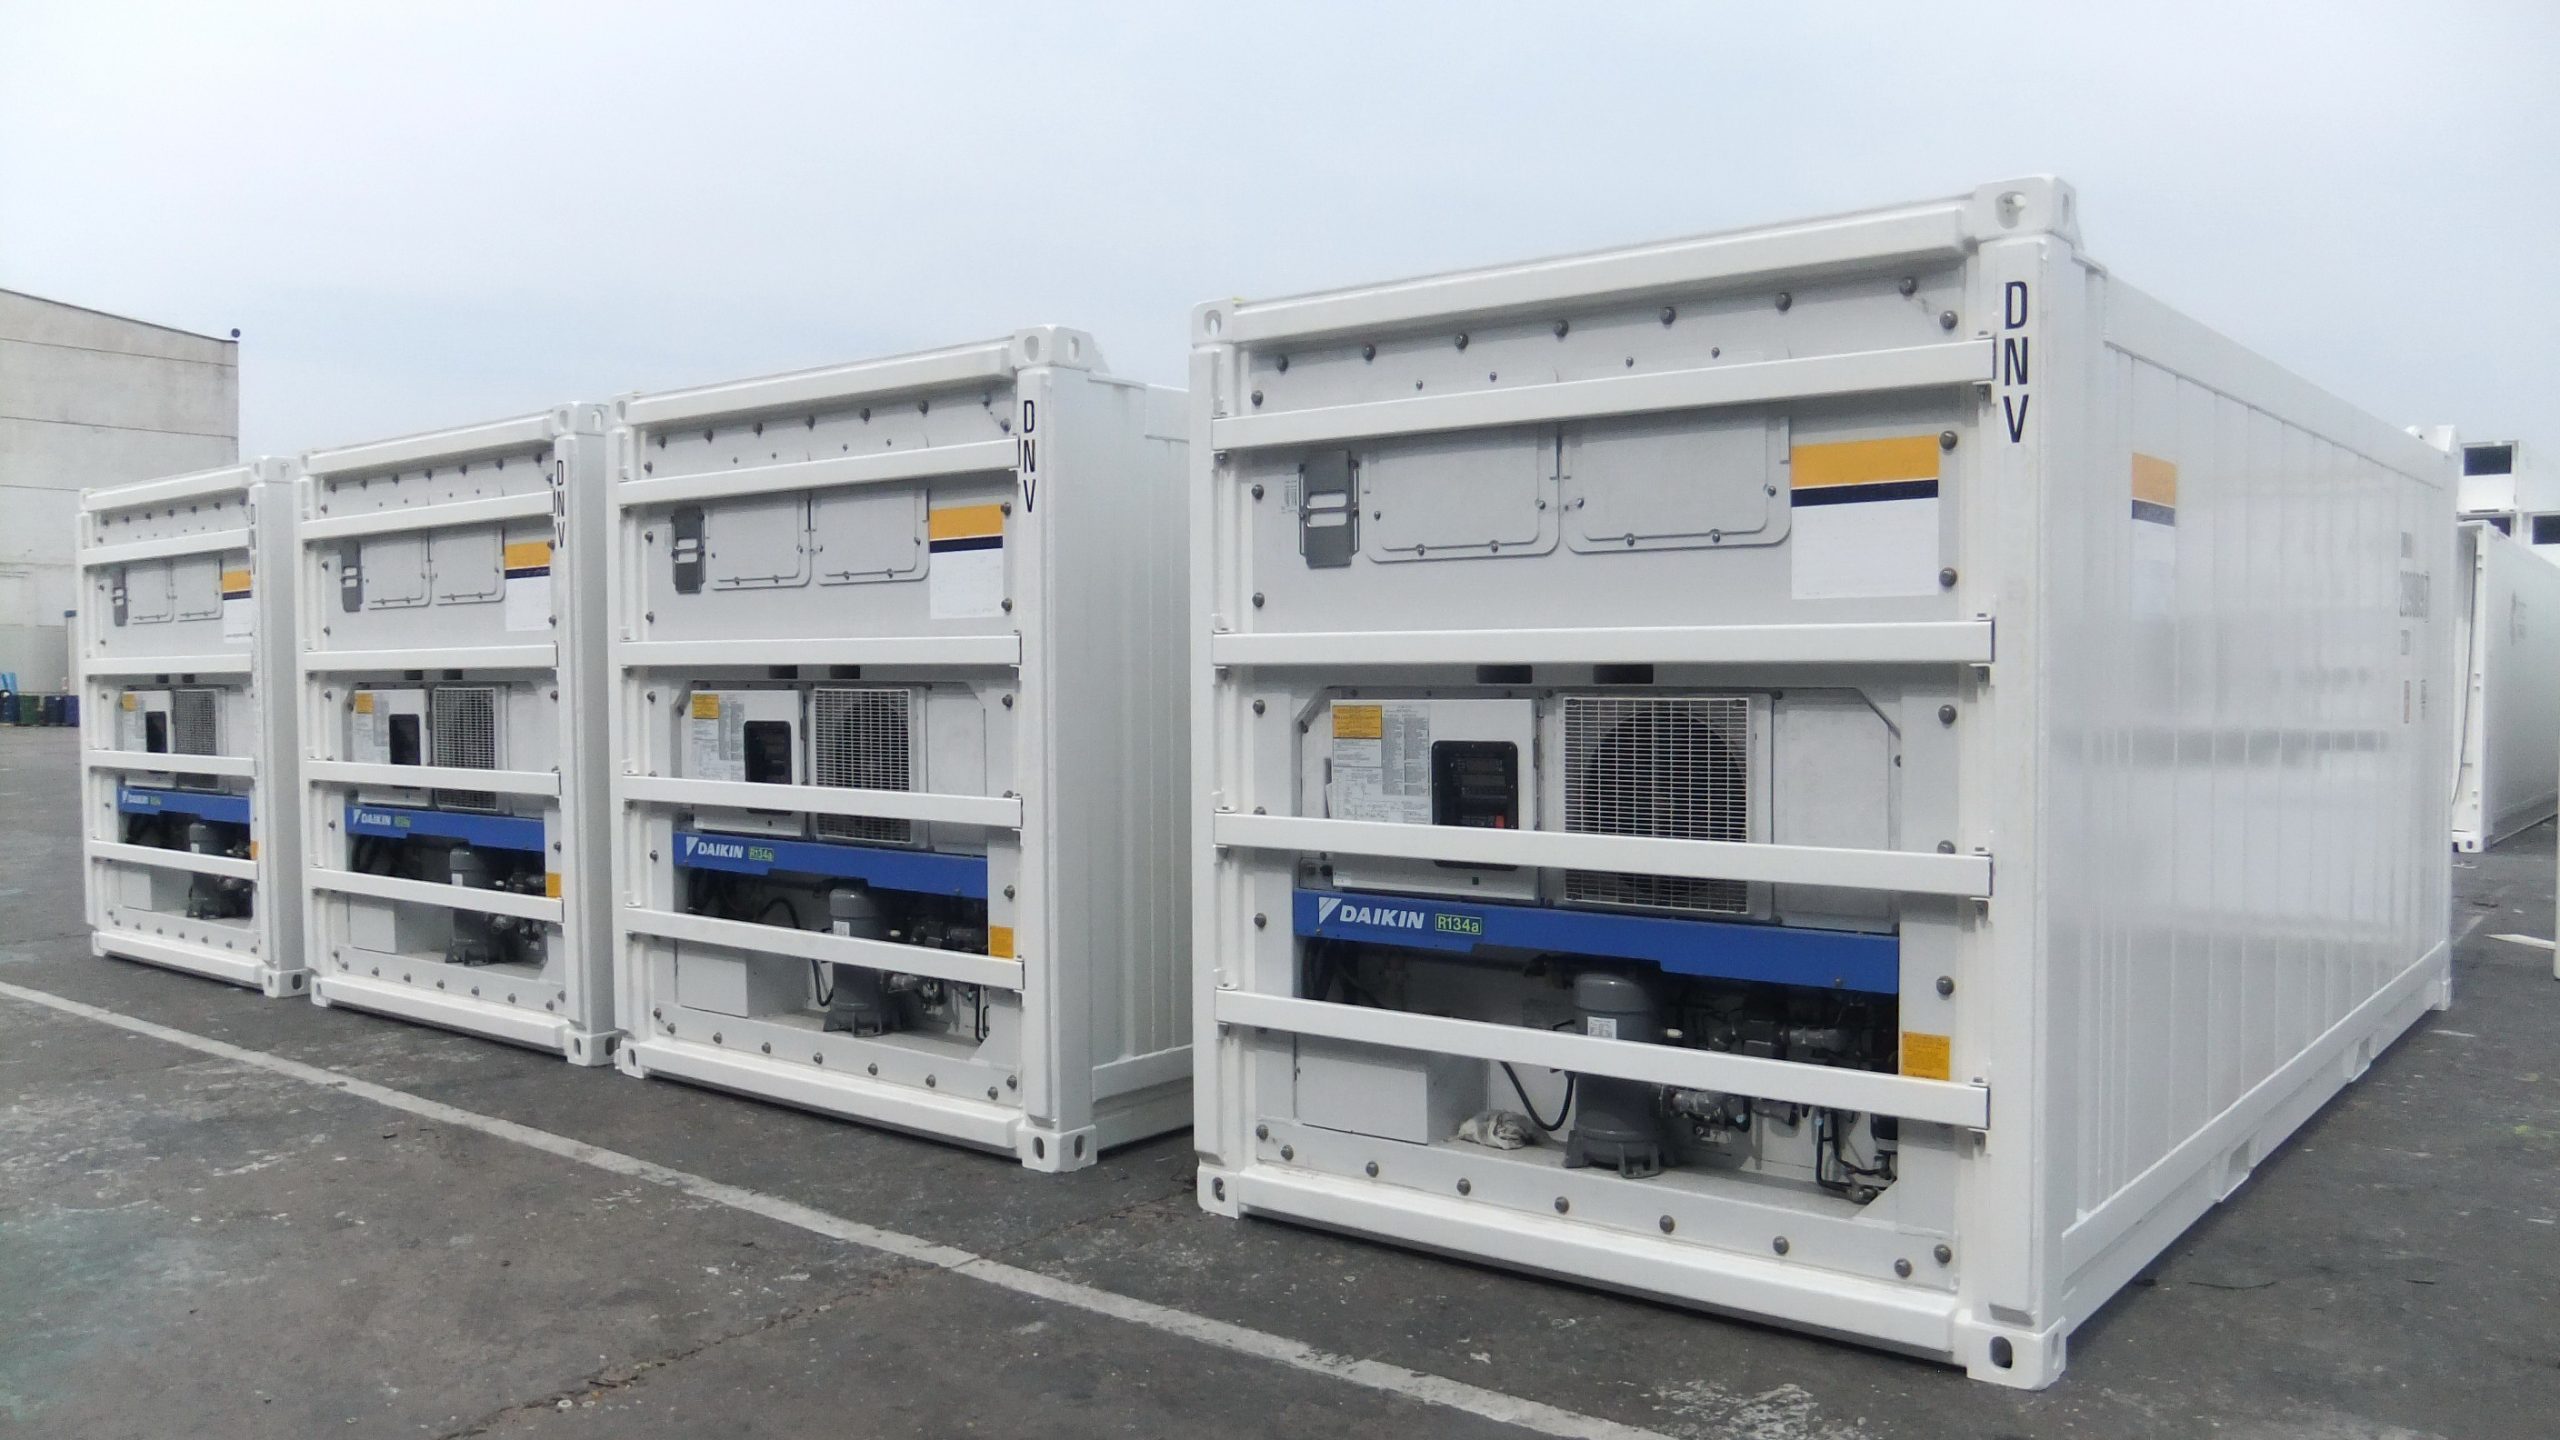 dnv container